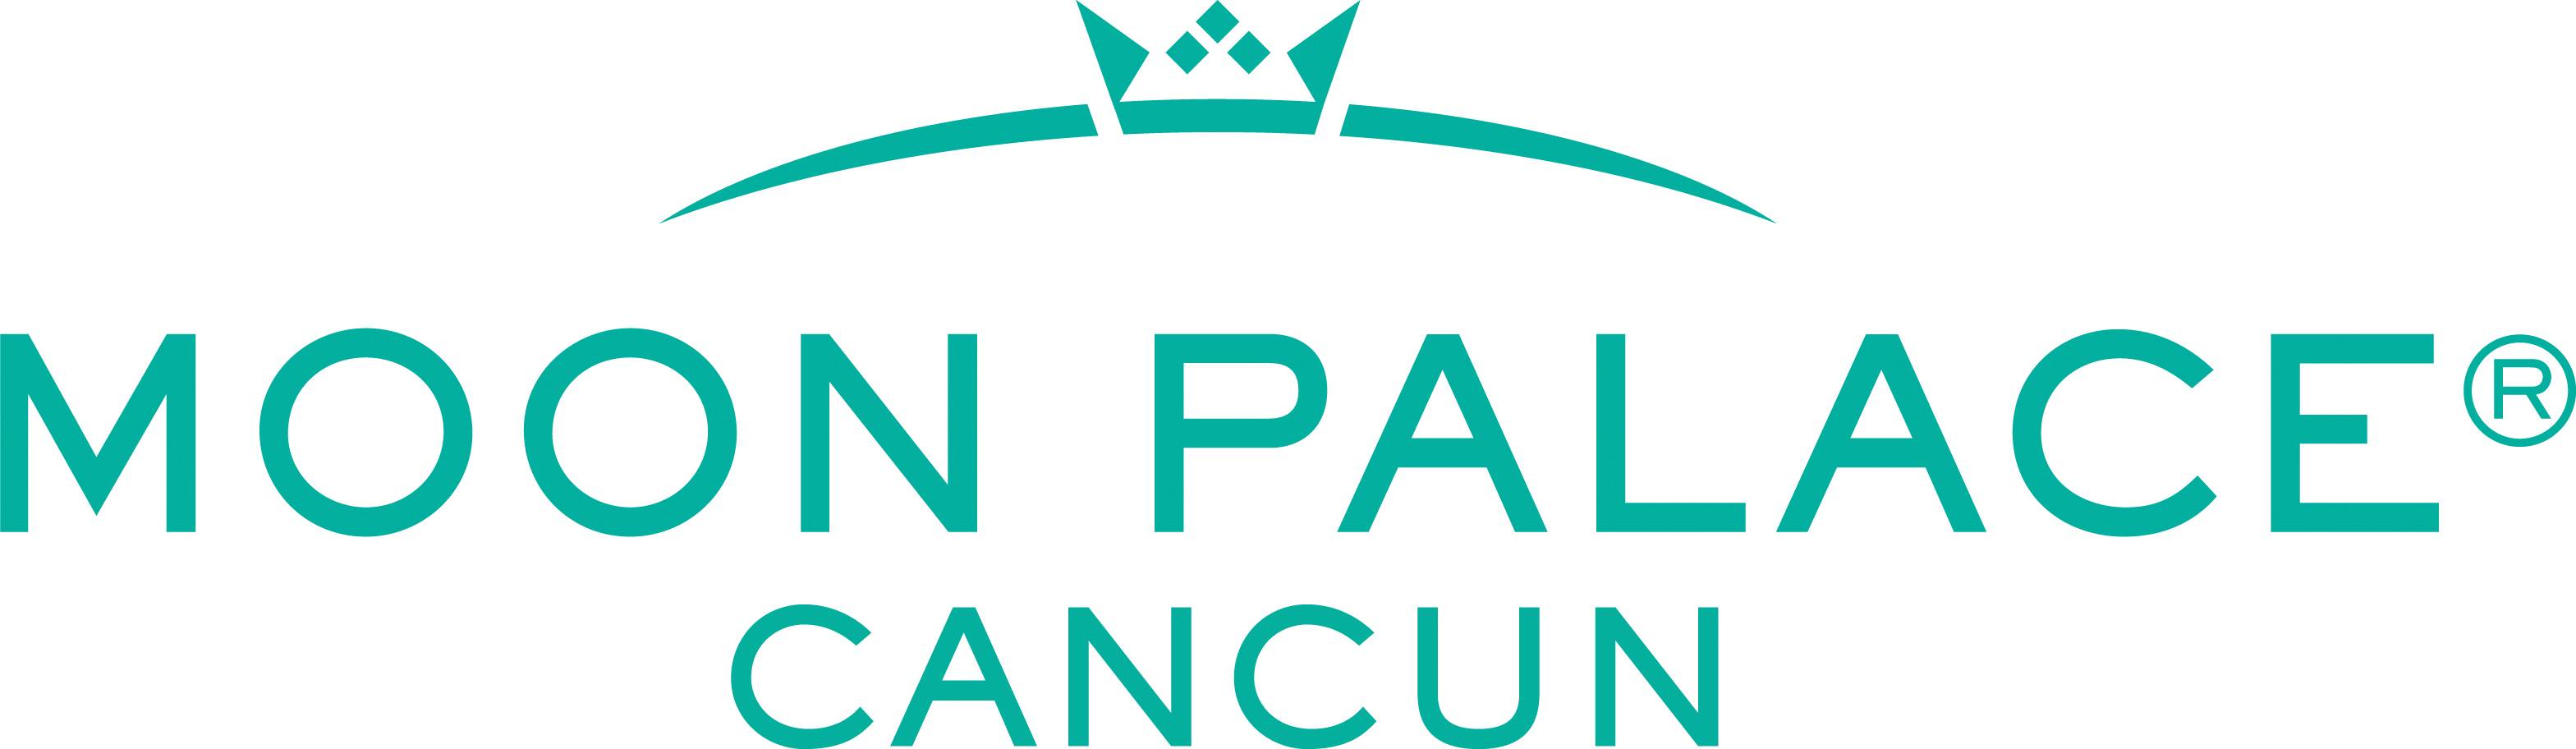 Moon Palace Logo - Moon Palace Cancun - All-Inclusive in Cancun, Mexico | BookIt.com